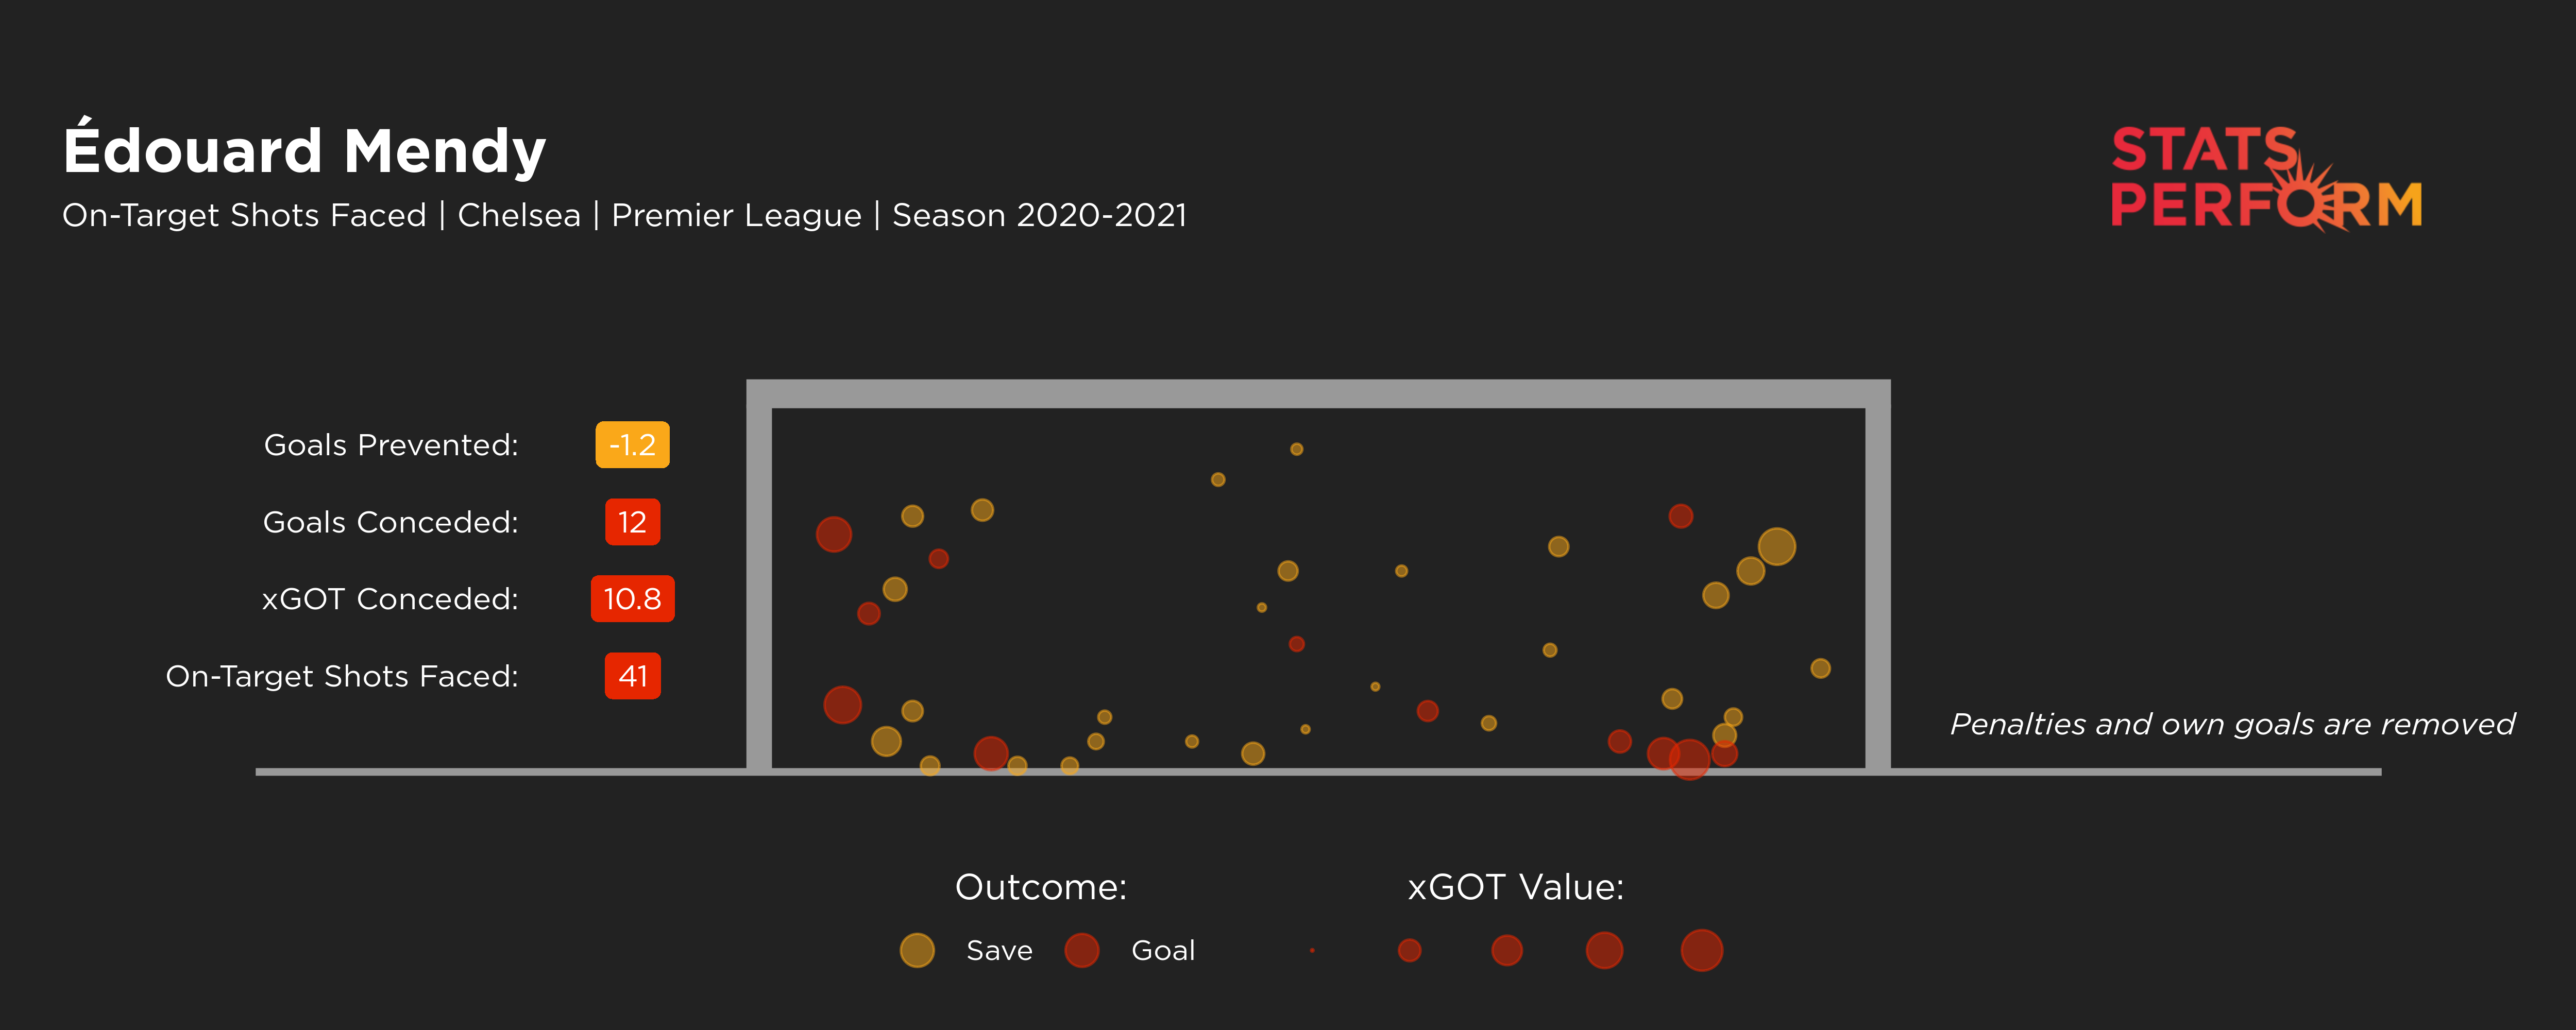 Edouard Edouard Mendy has conceded one more goal than would be expected from the xG value of shots he has faced in the Premier League in 2020-21Mendy